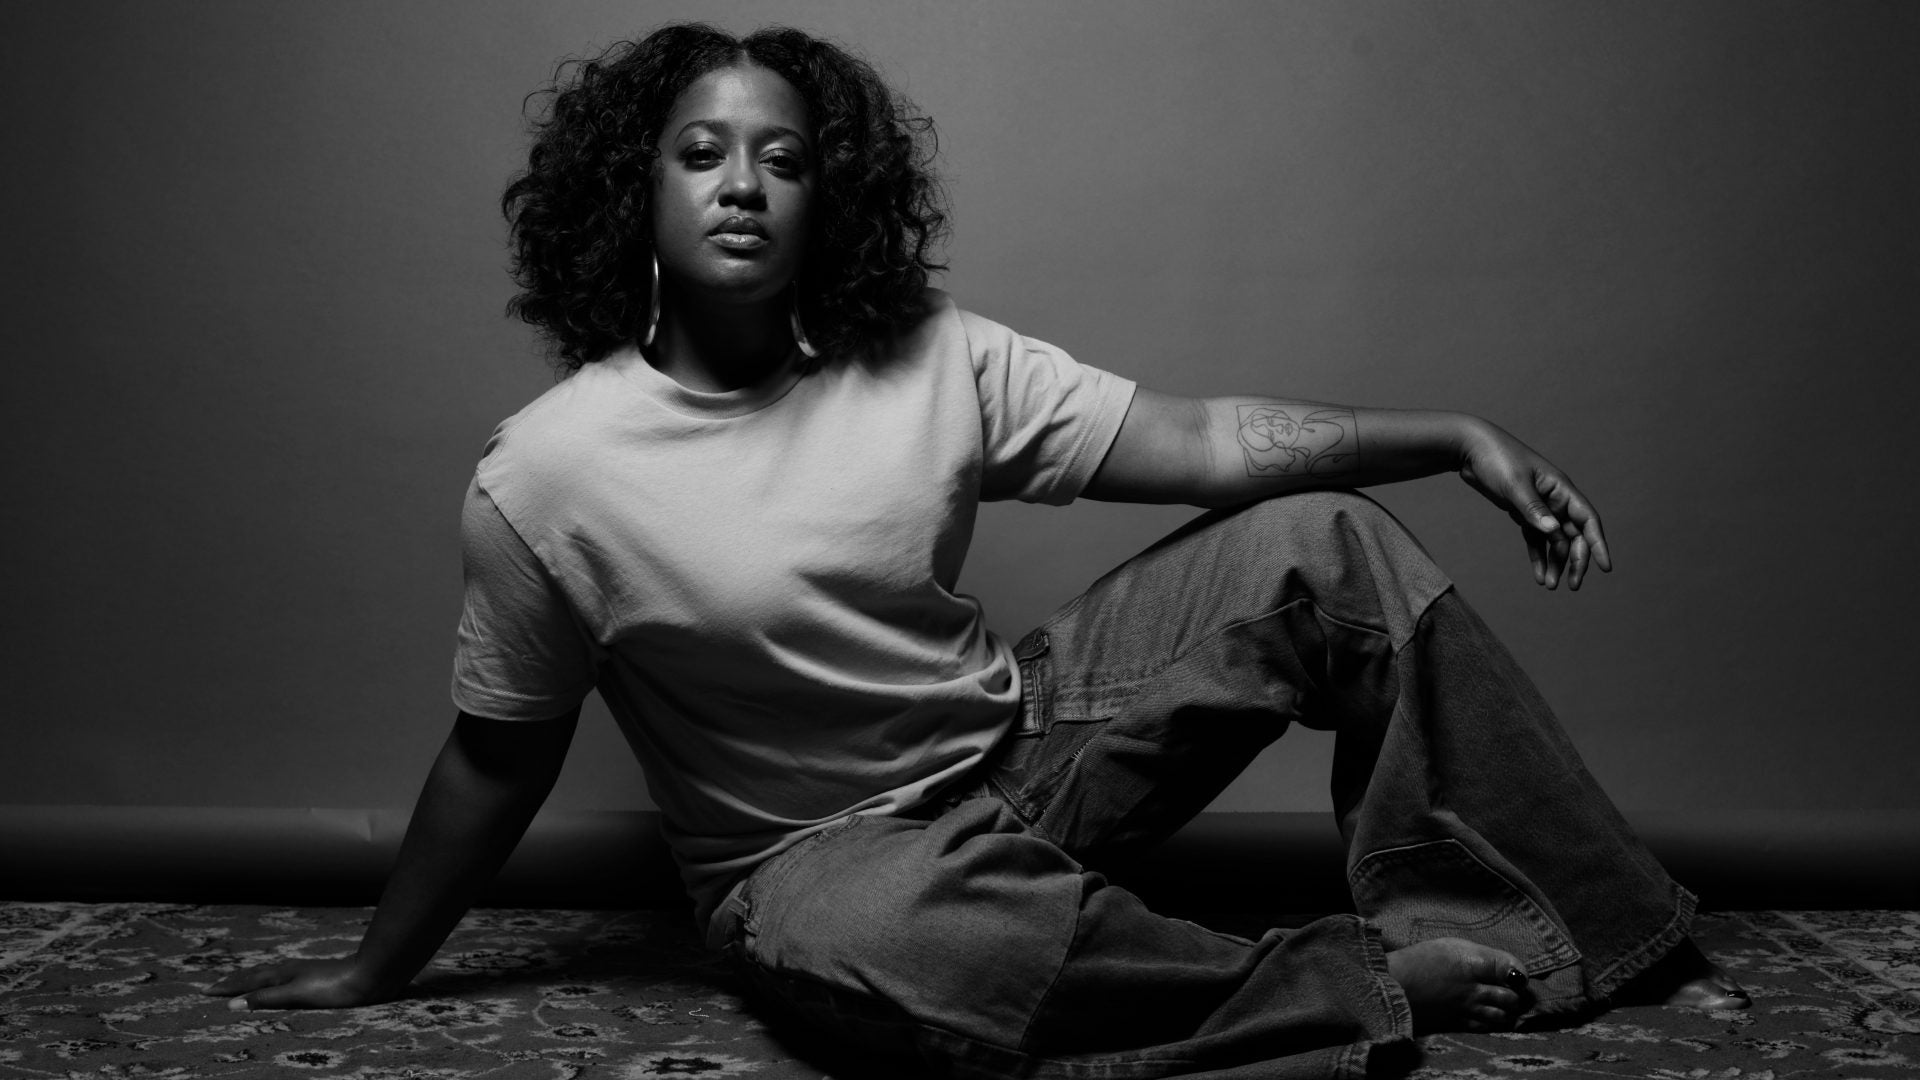 Rapsody Documents Her Path Towards Healing And Self-Discovery With ‘Please Don’t Cry’